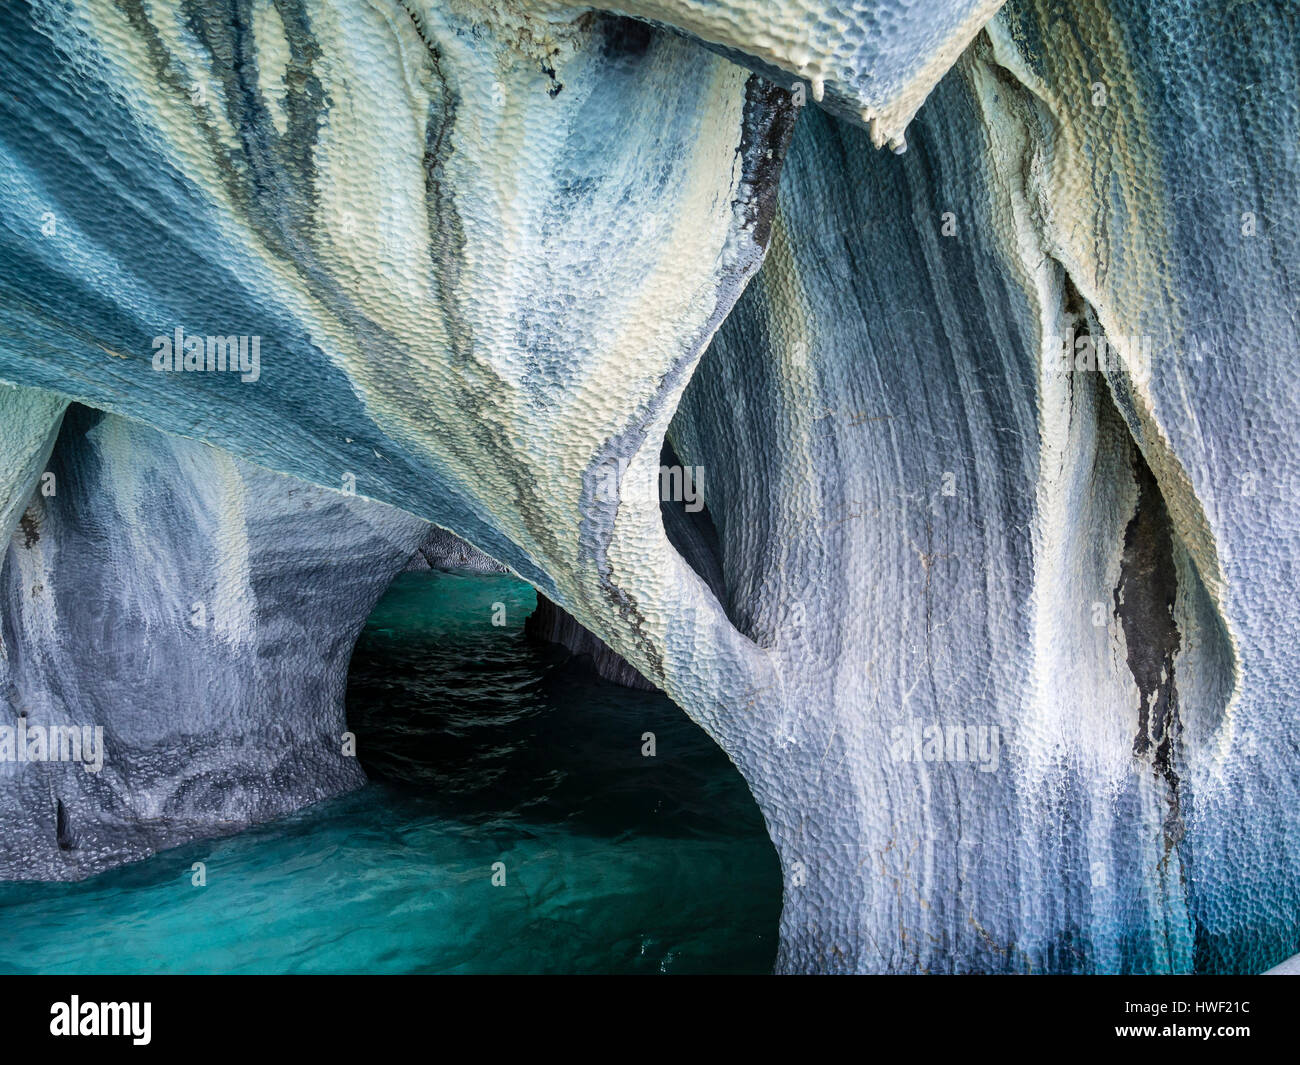 Inside the marble caves near Puerto Rio Tranquilo, small sightseeing boats explore single areas of the cave, Aysen region, Patagonia, Chile Stock Photo